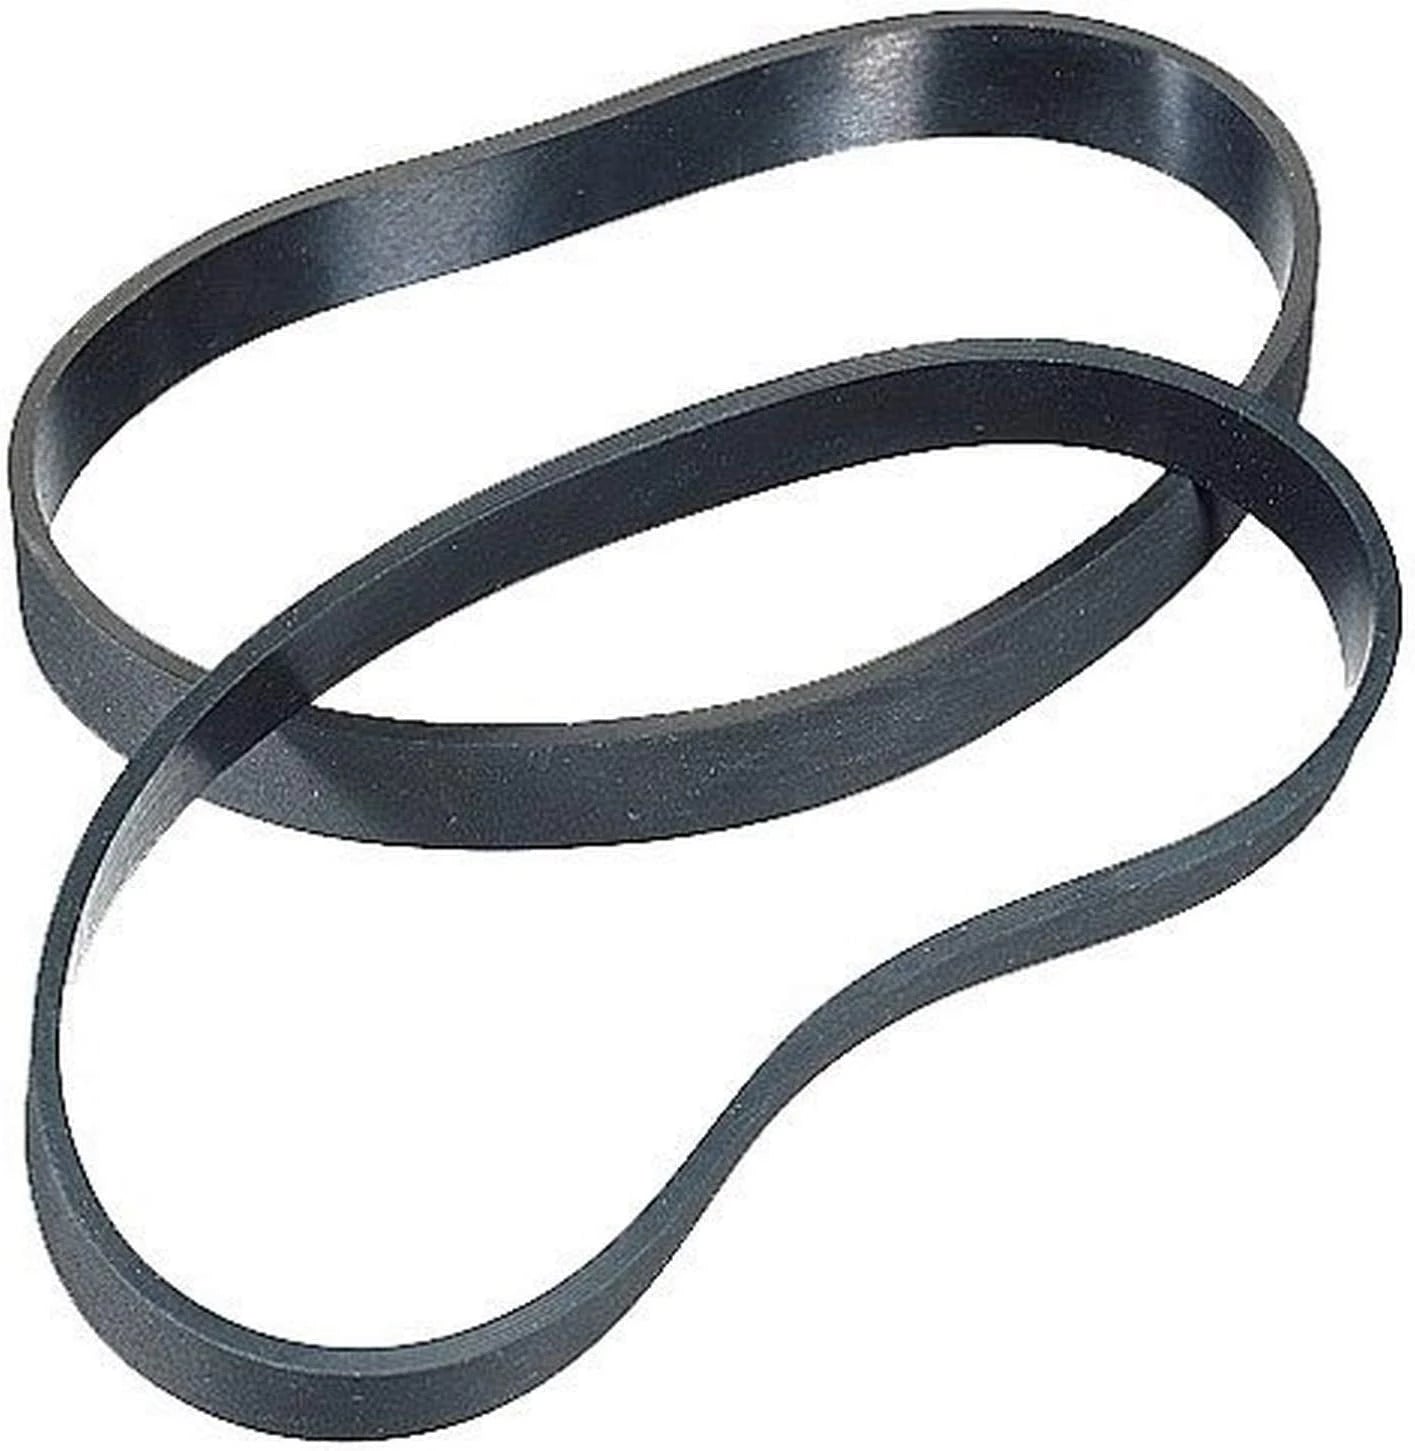 Replacement Belts